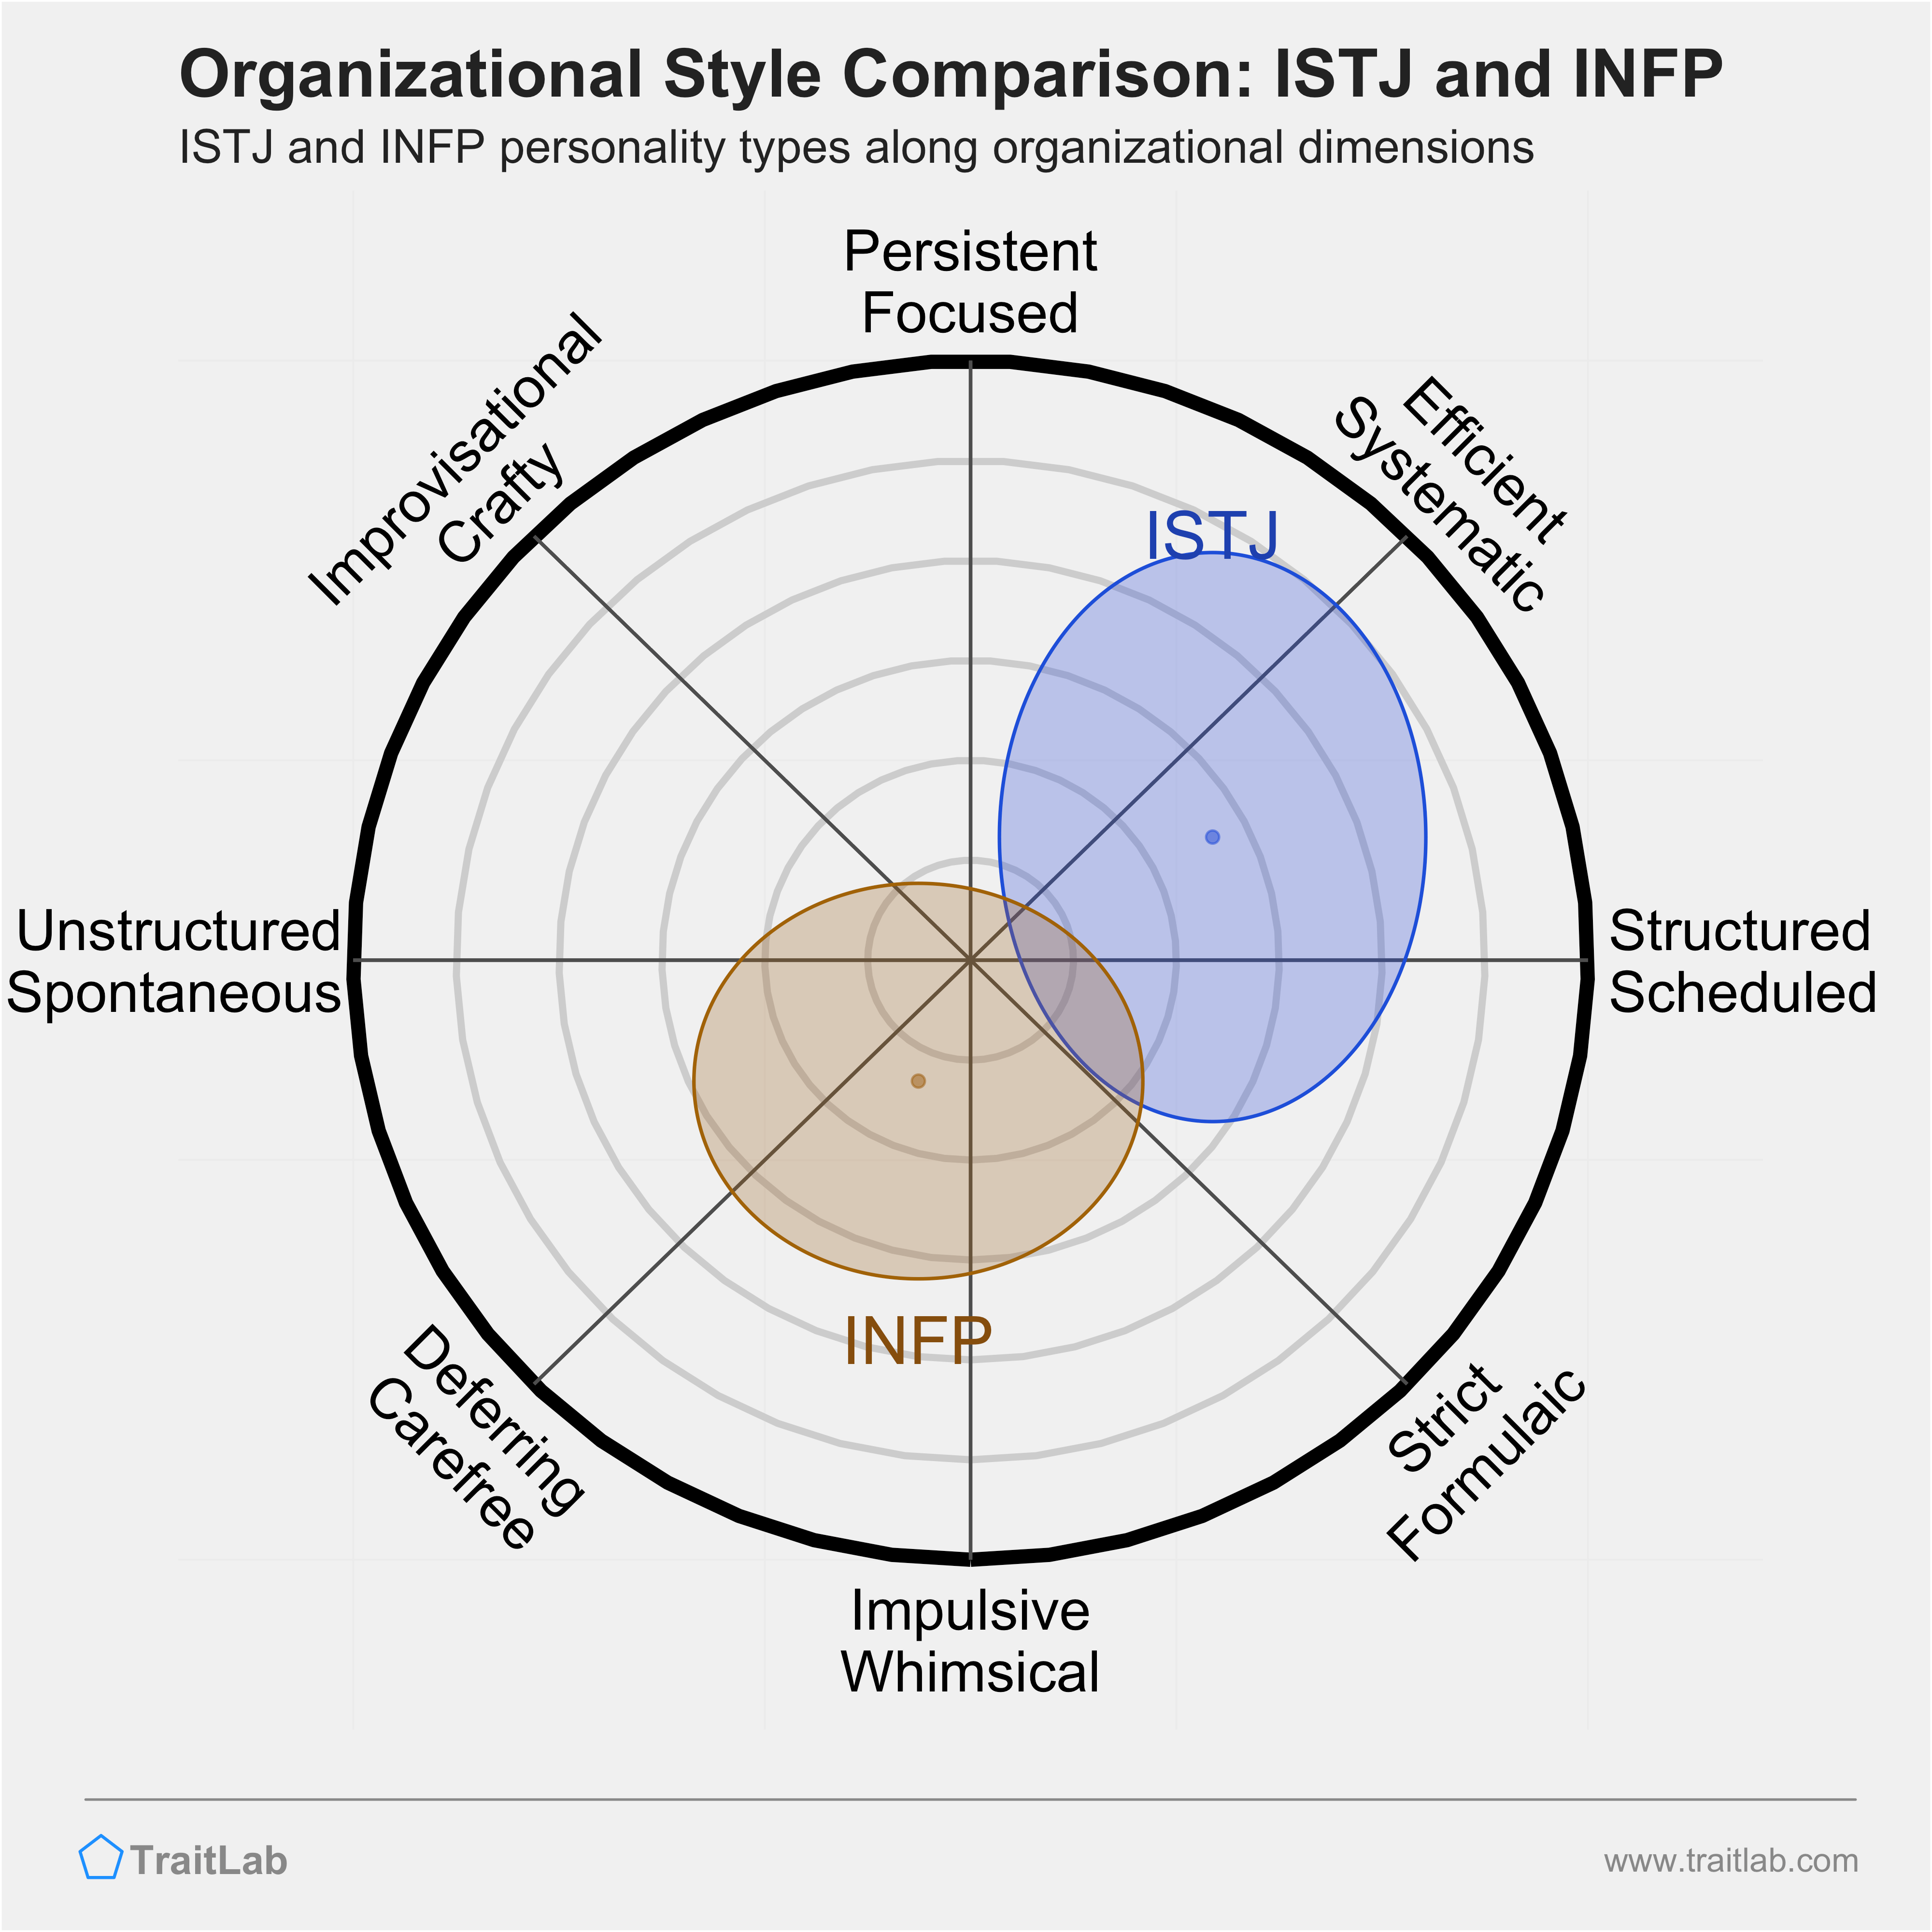 ISTJ and INFP comparison across organizational dimensions